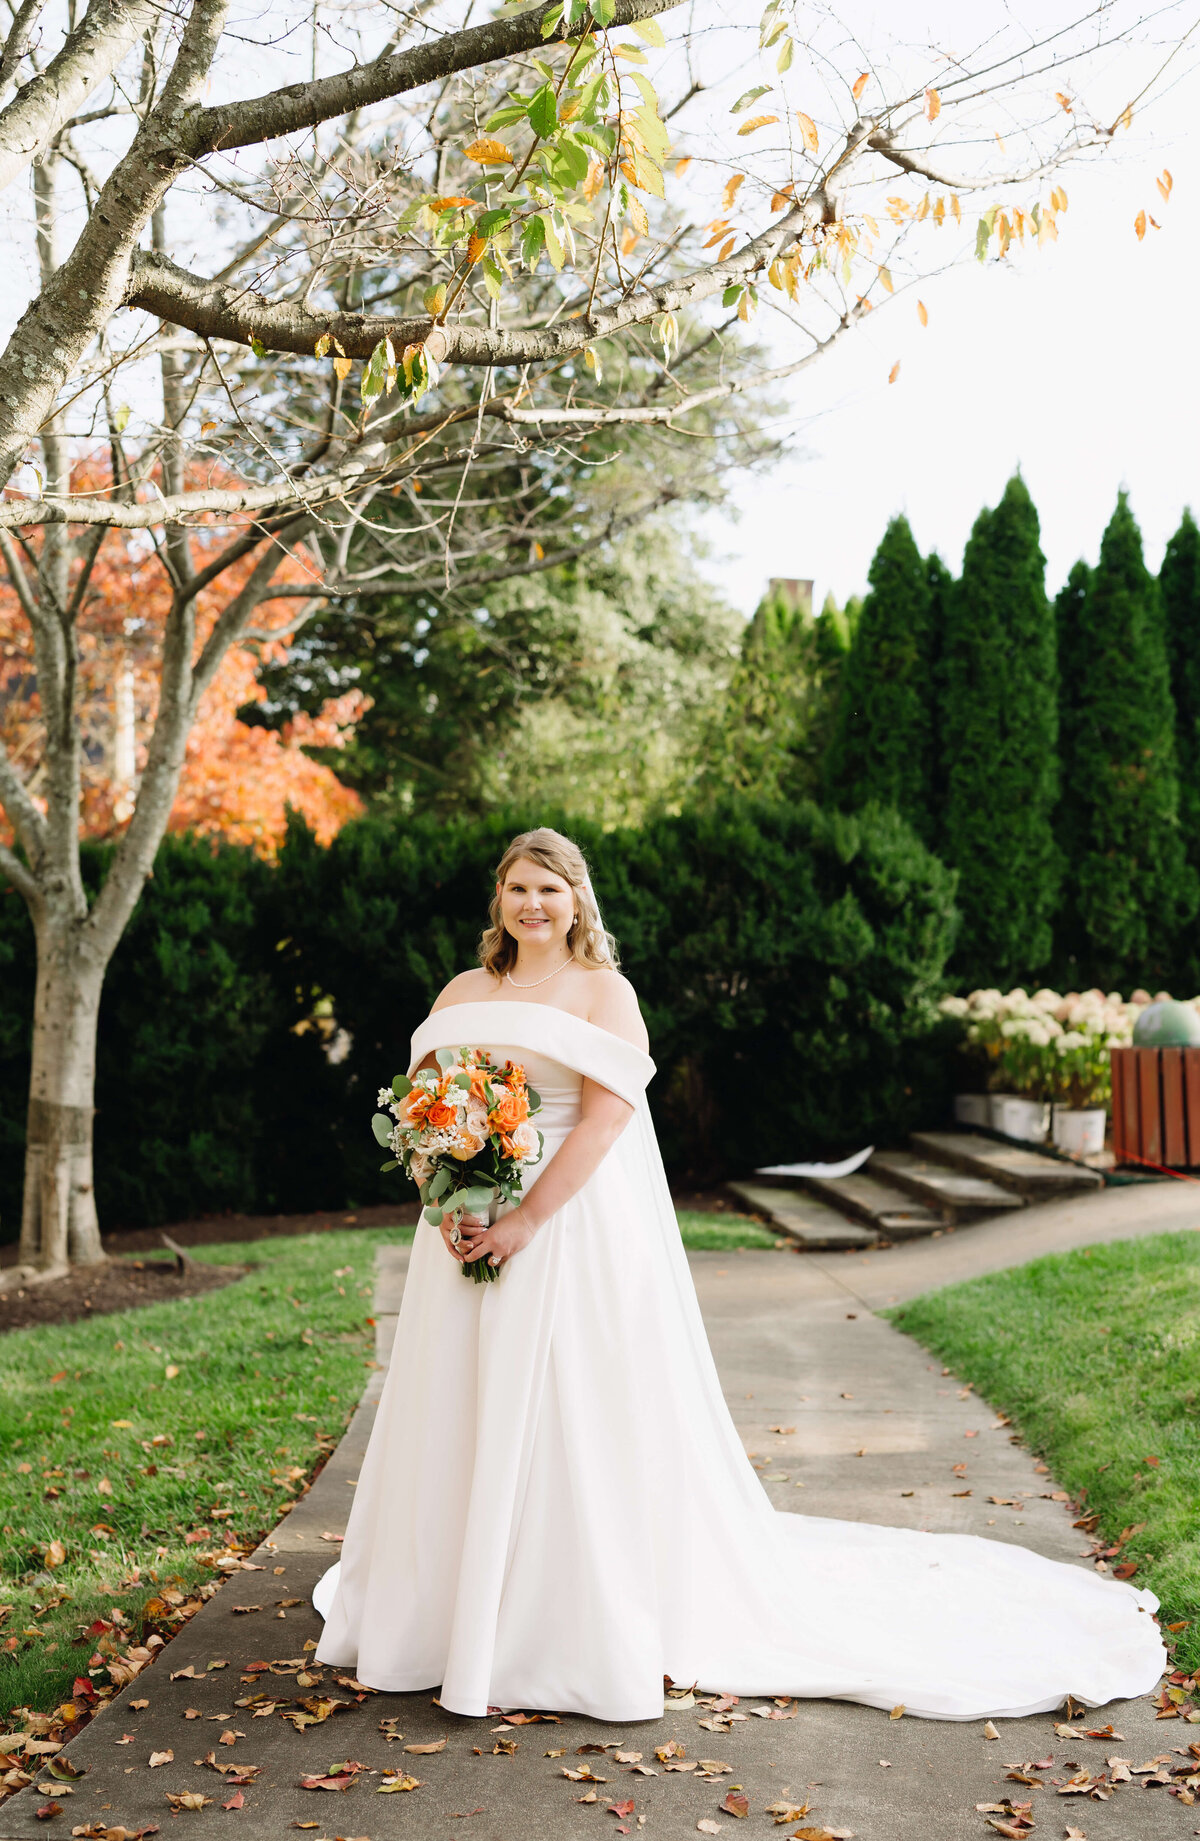 Richmond weddings with Virginia wedding photographer capturing bride in a freshly manicured lawn at a venue in the autumn months with leaves on the ground